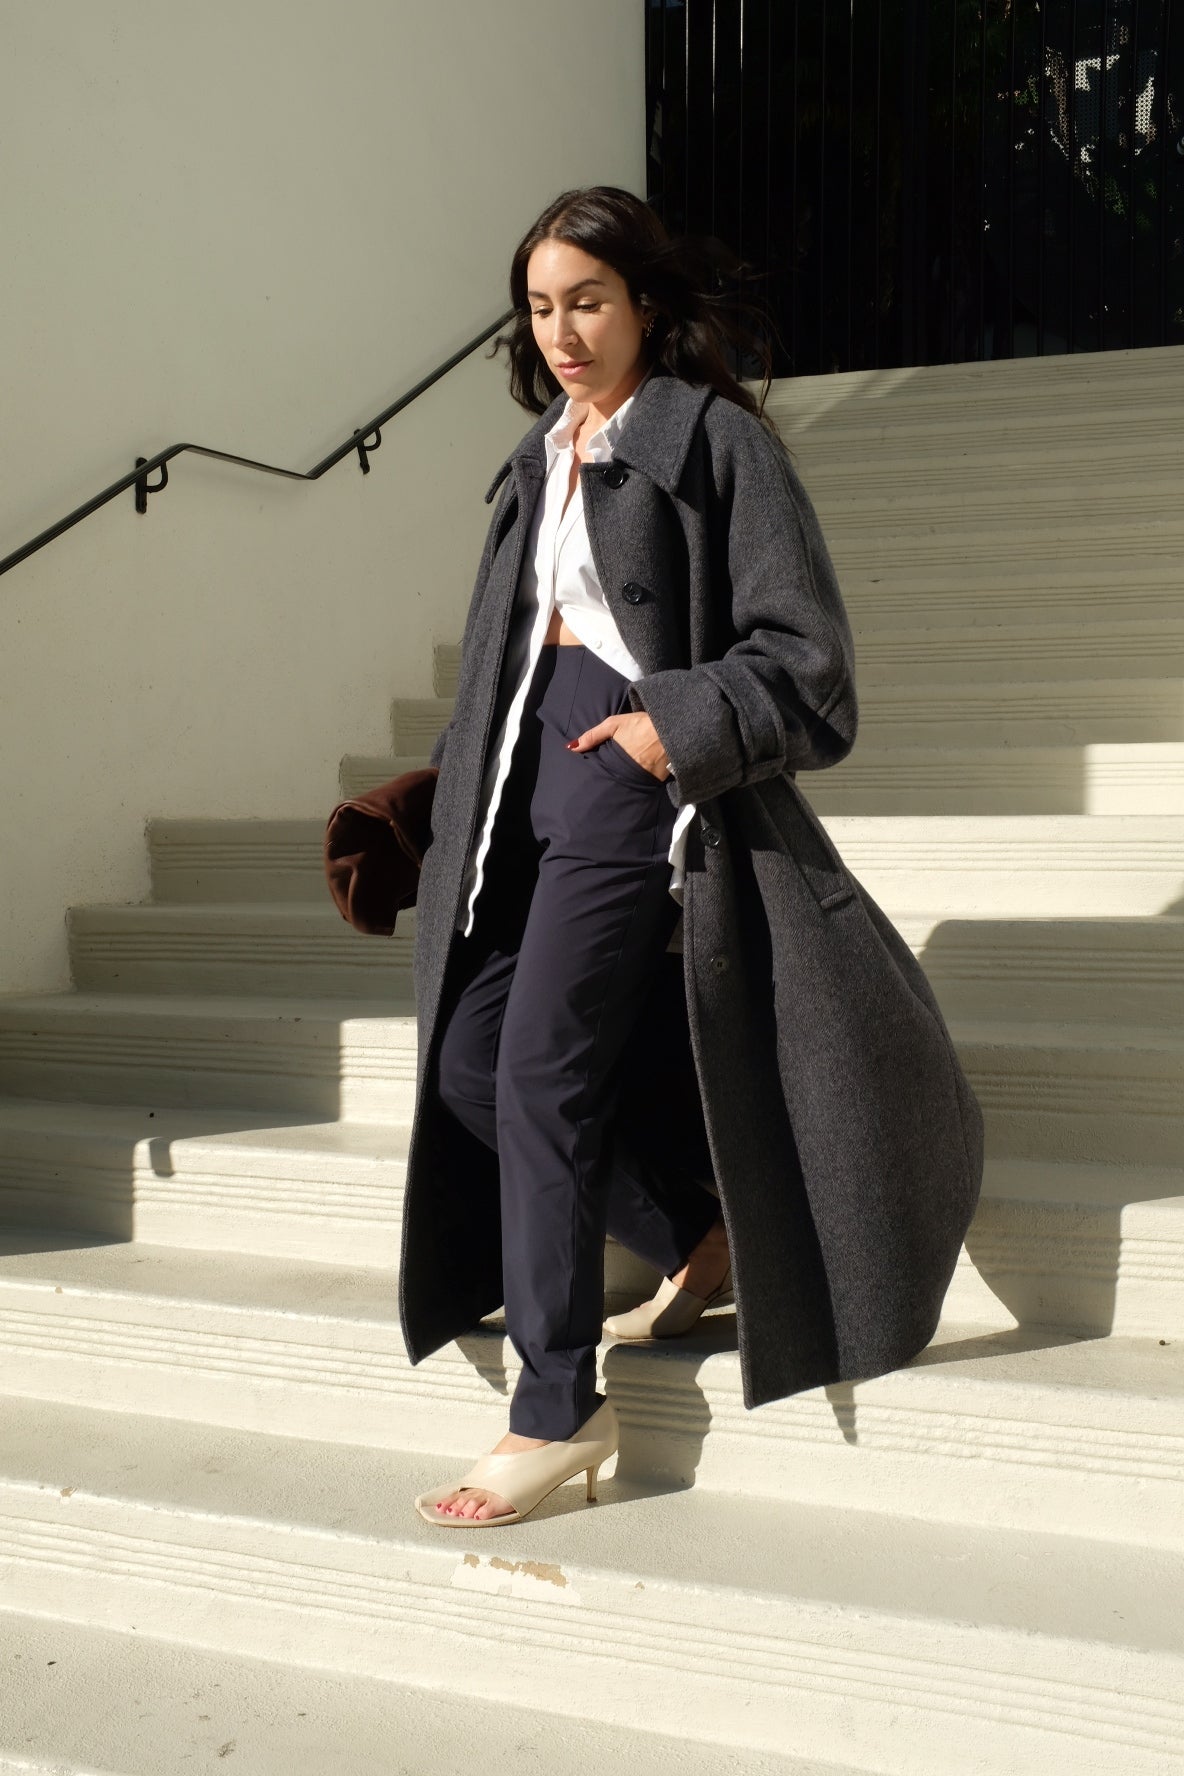 Woman descending stairs in stylish attire with a coat and heels.